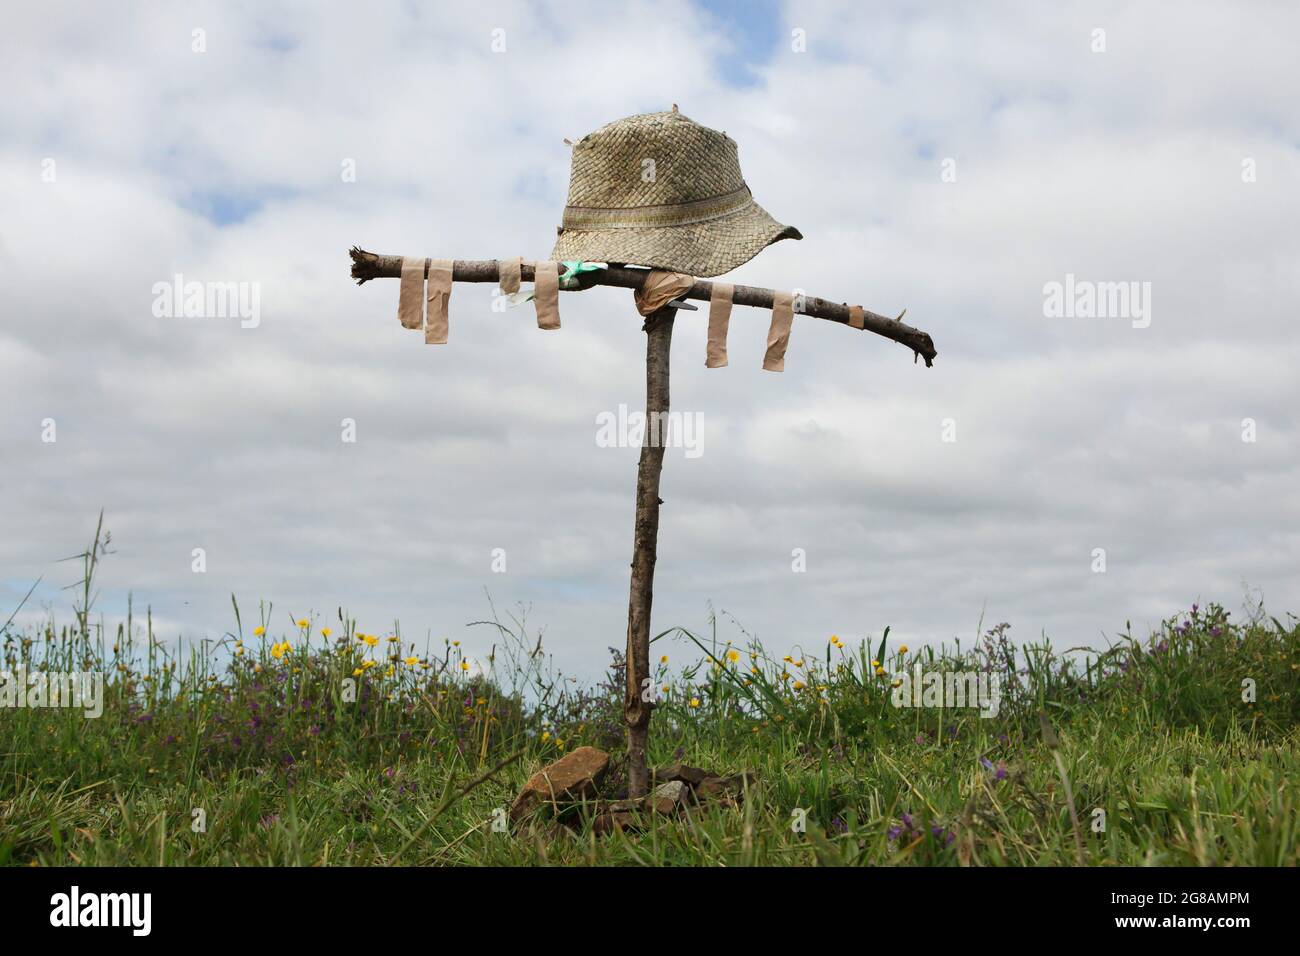 Camino de Santiago (Way of Saint James). Wooden cross decorated with an old straw hat and used adhesive bandages erected by unknown pilgrims on Monte do Gozo near Santiago de Compostela in Galicia, Spain. Monte do Gozo is the last stop on the French route and the Northern route of the Camino de Santiago from where pilgrims see the destination city for the first time. Stock Photo